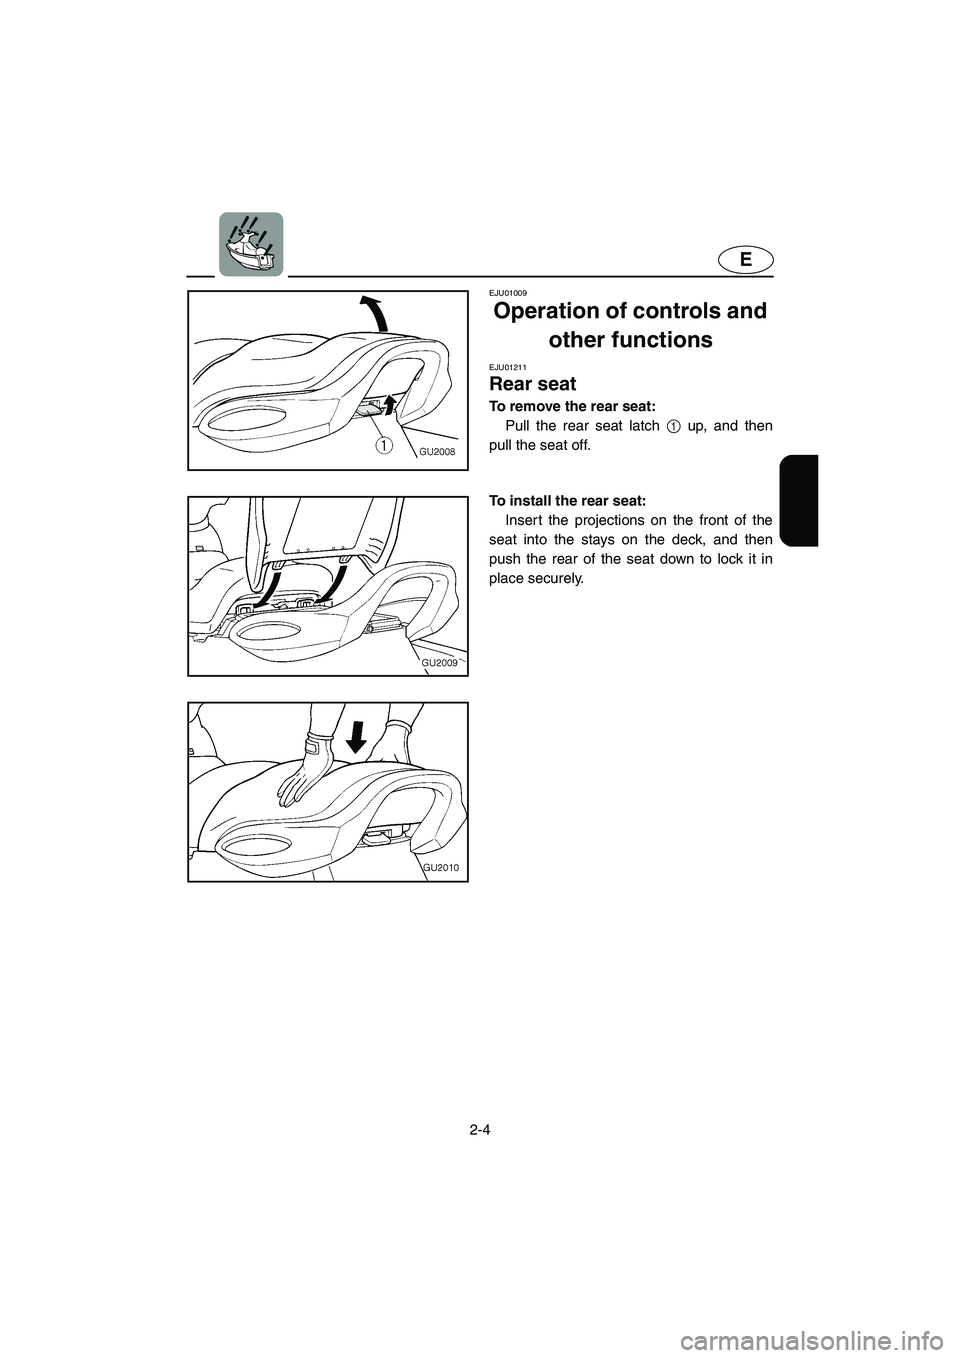 YAMAHA XL 700 2005  Owners Manual 2-4
E
EJU01009 
Operation of controls and 
other functions 
EJU01211 
Rear seat  
To remove the rear seat: 
Pull the rear seat latch 1 up, and then
pull the seat off. 
To install the rear seat: 
Inser